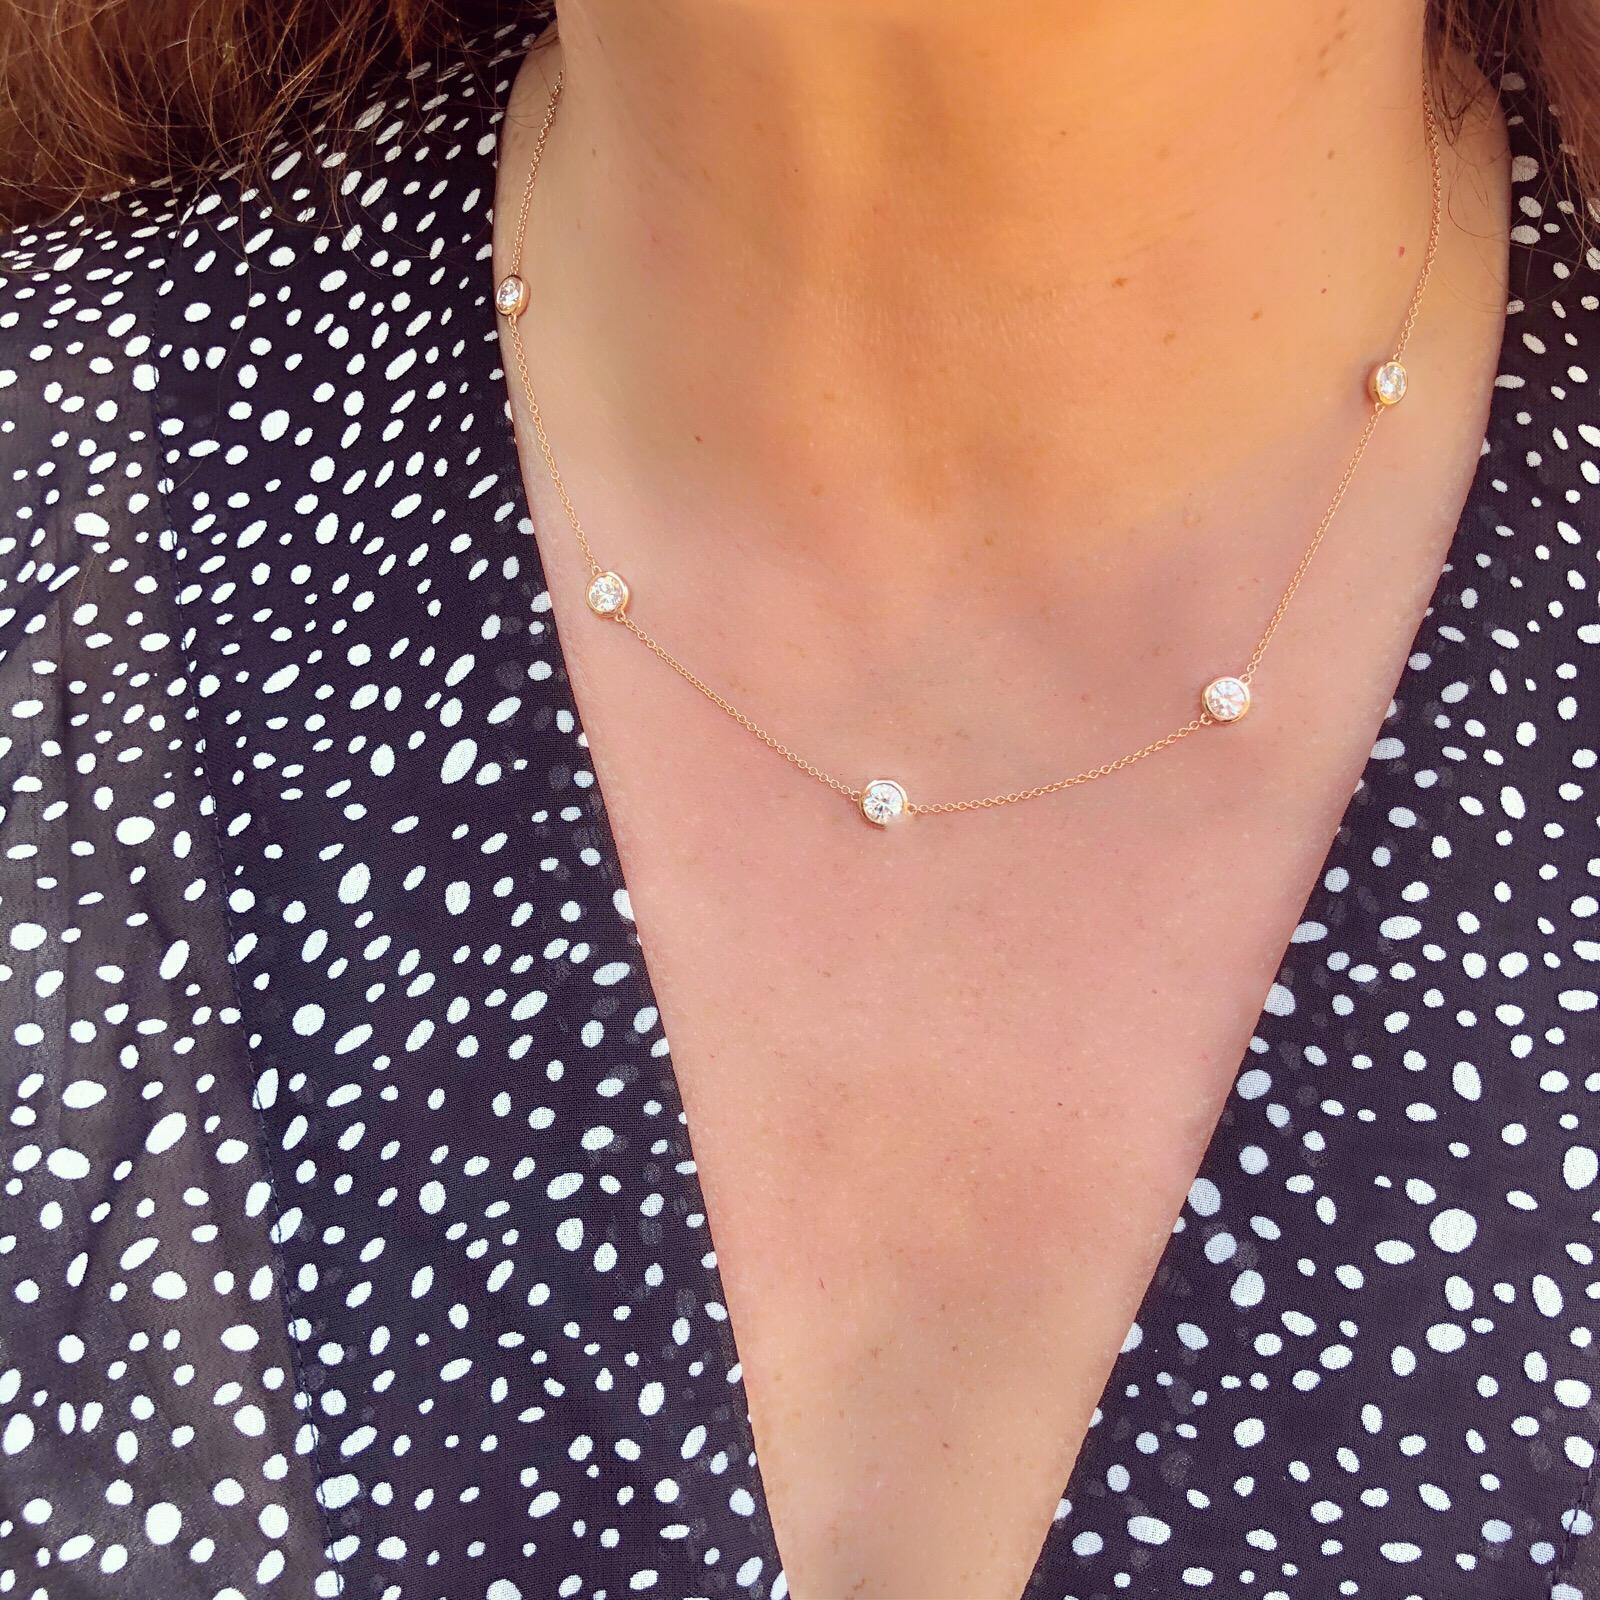 A unique take on a classic style. This 18 karat Rose Gold Diamonds By The Yard Necklace features 5 sparkling white round brilliant cut diamonds expertly bezel set on an adjustable chain. With two loops perfectly situated on the necklace, this